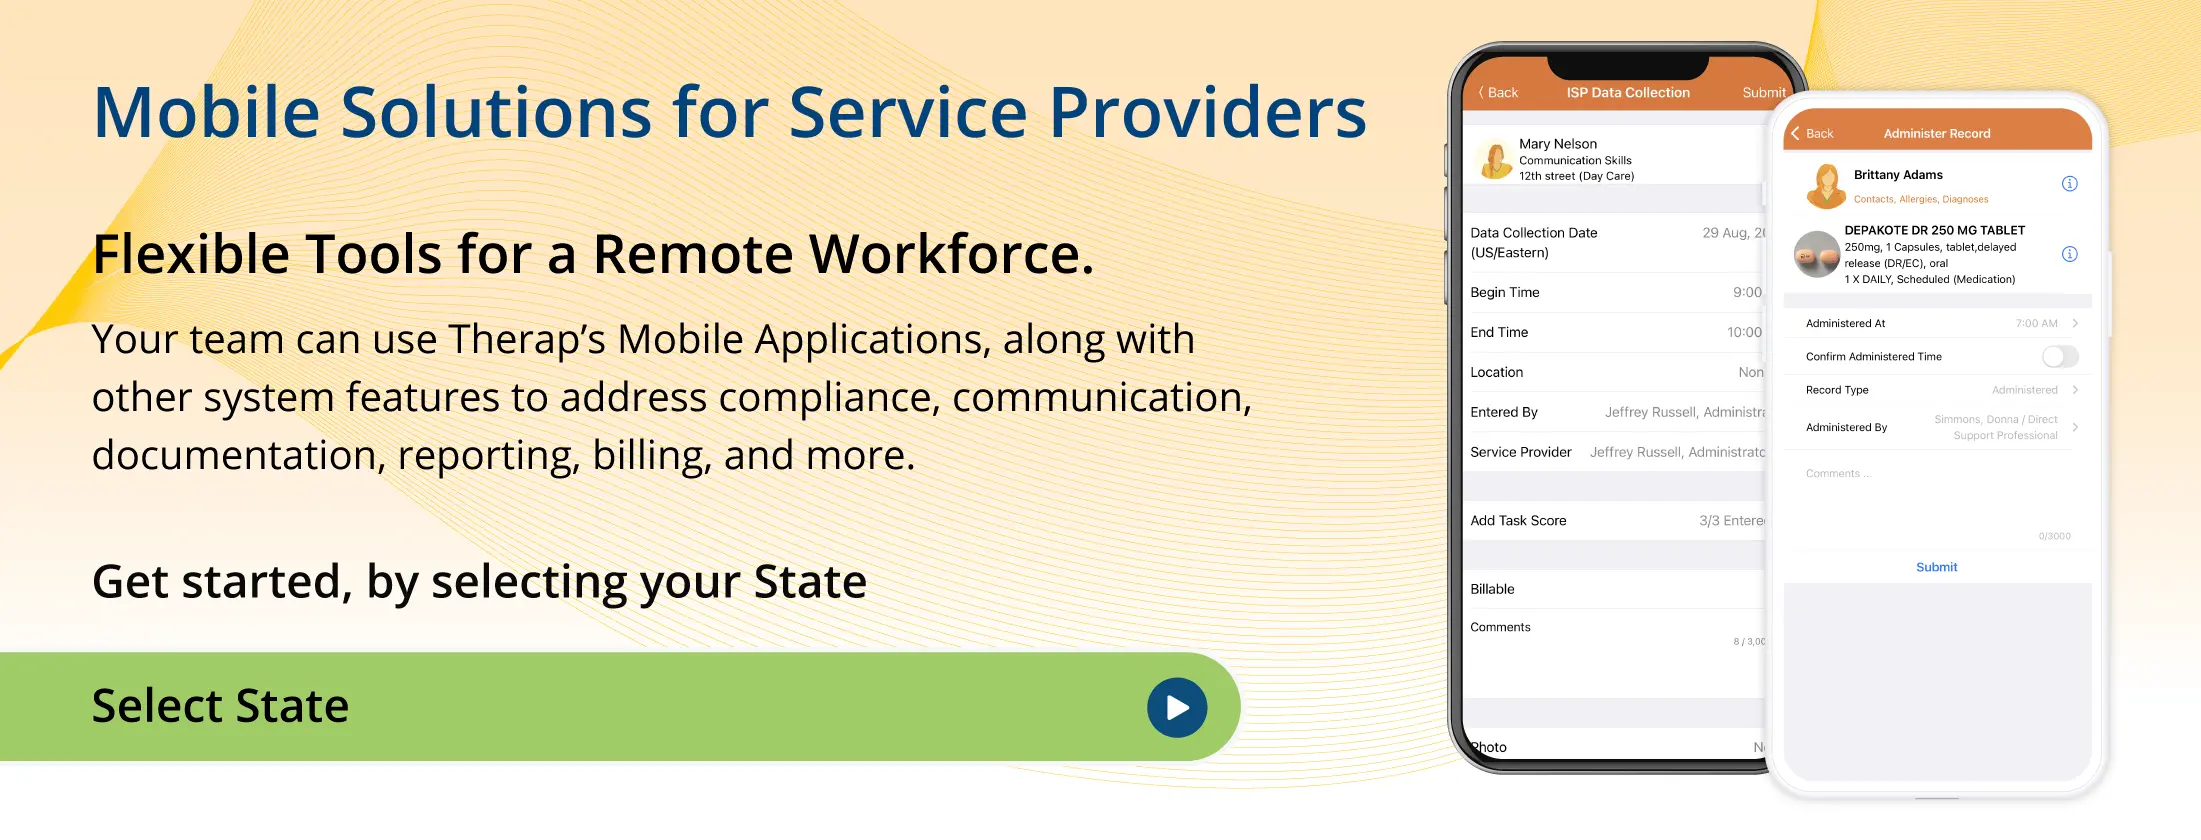 Mobile Solutions for Service Providers